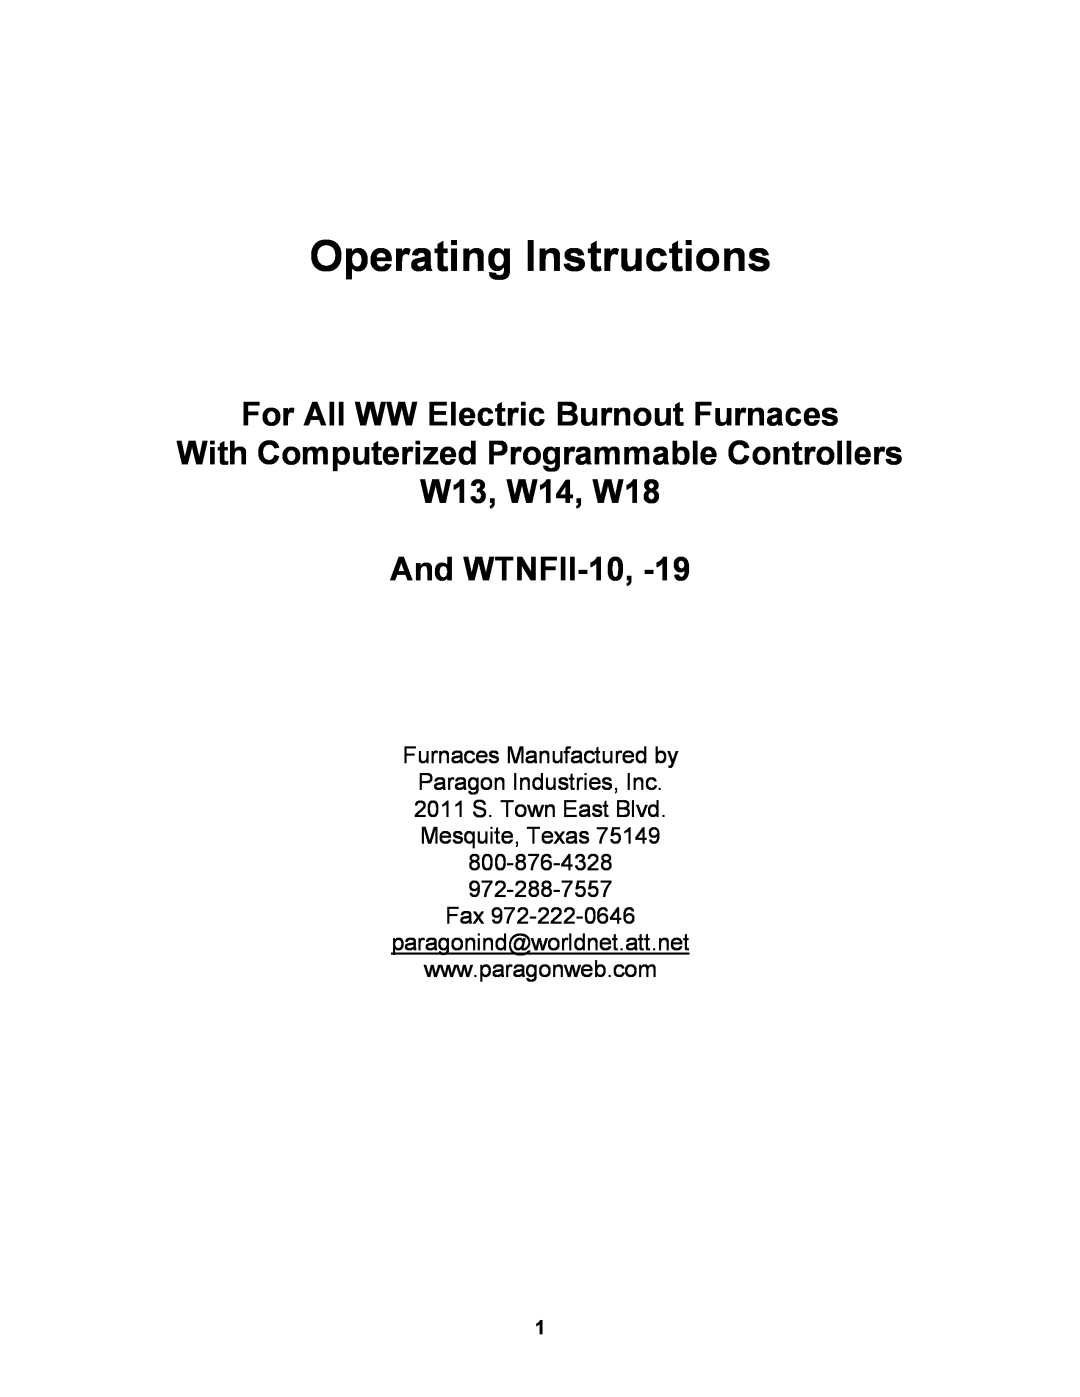 Paragon WTNFII-19 manual Operating Instructions, For All WW Electric Burnout Furnaces, W13, W14, W18 And WTNFII-10 